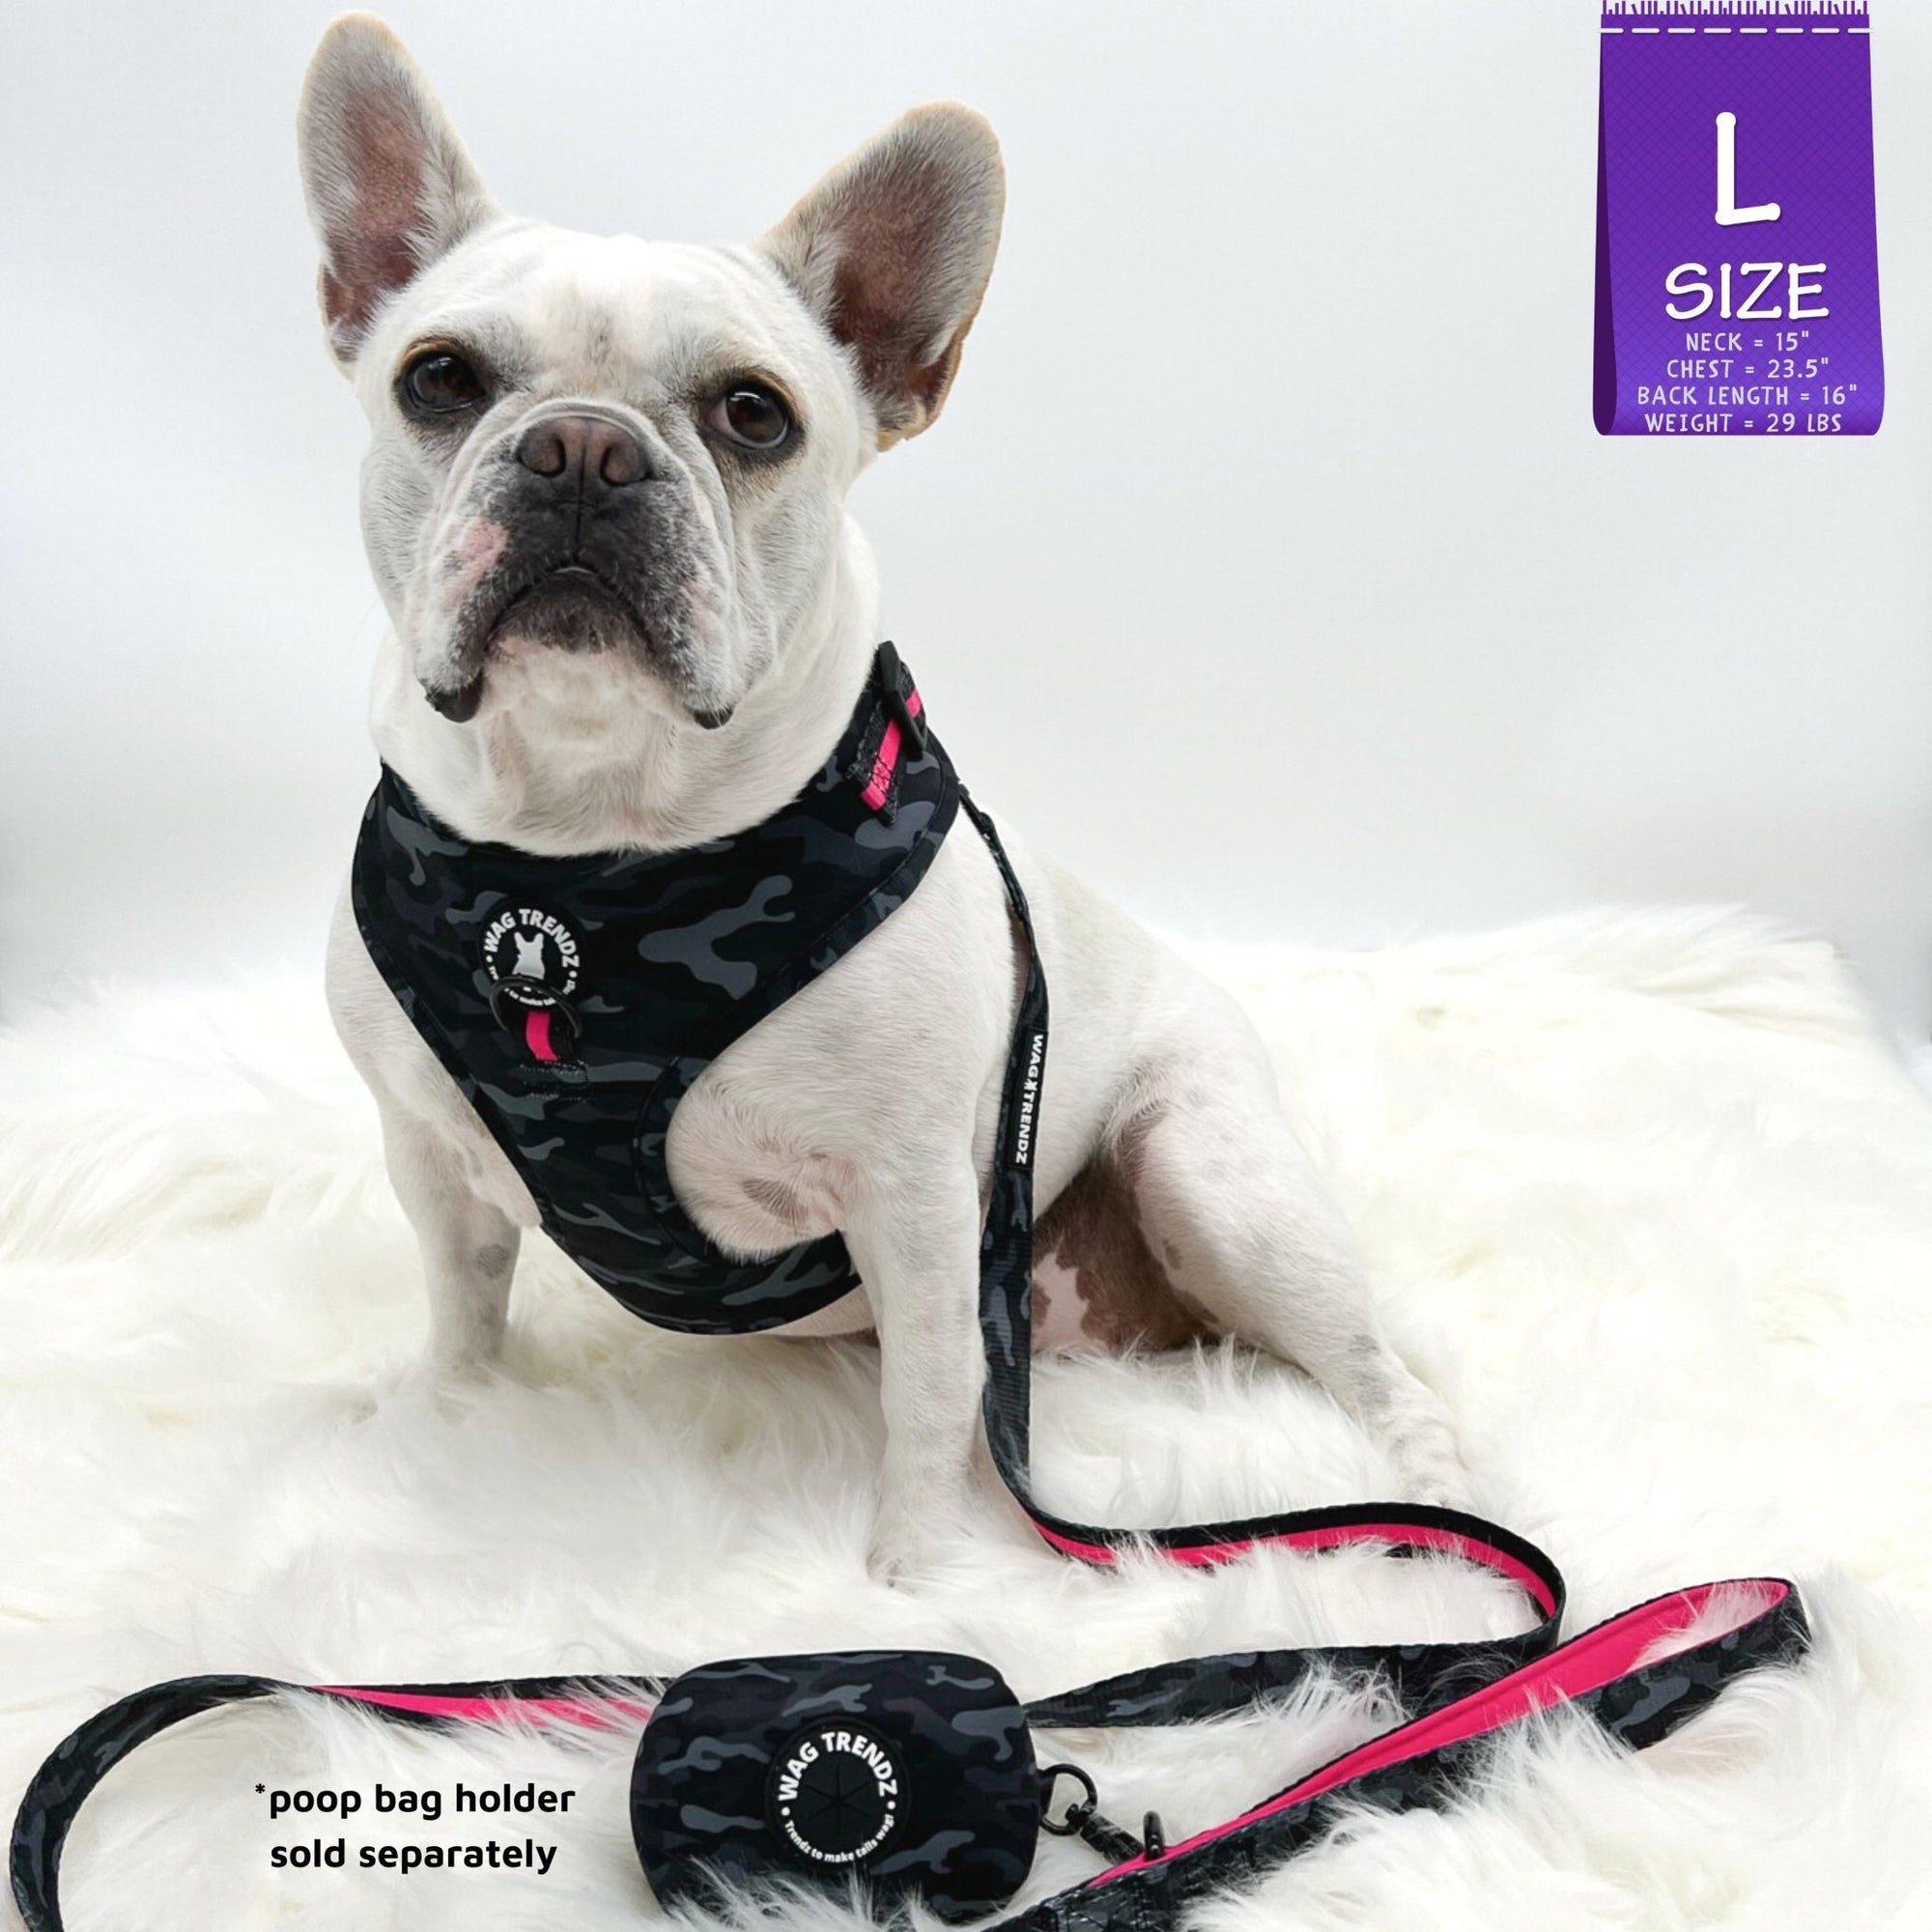 Dog Collar Harness and Leash Set - French Bulldog wearing L Dog Adjustable Harness with matching Dog Leash and Poo Bag Holder in black &amp; gray camo with hot pink accents - against solid white background - Wag Trendz